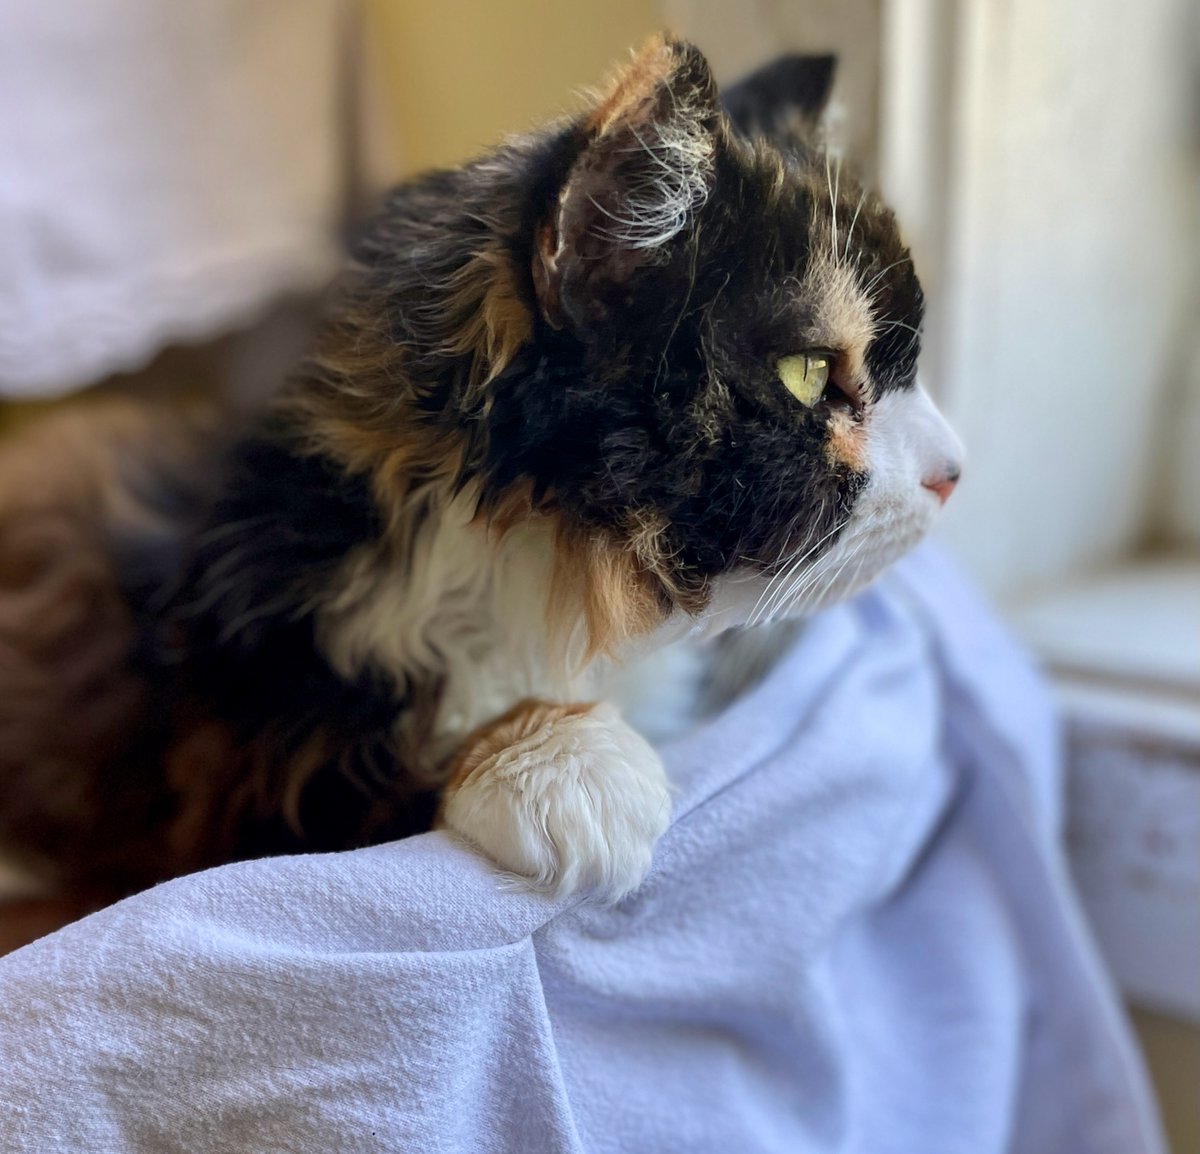 Callie has received a couple of inquiries! All paws crossed for this sweet senior kitty! Stay tuned! 💖🐾
#va #virginia #AdoptDontShop #cats #catlovers #thursday #purrsday #thursdayvibes #goodmorning #goodnews #PositiveEnergy #PositiveMindset #GoodVibes #cute #KittyTwitter